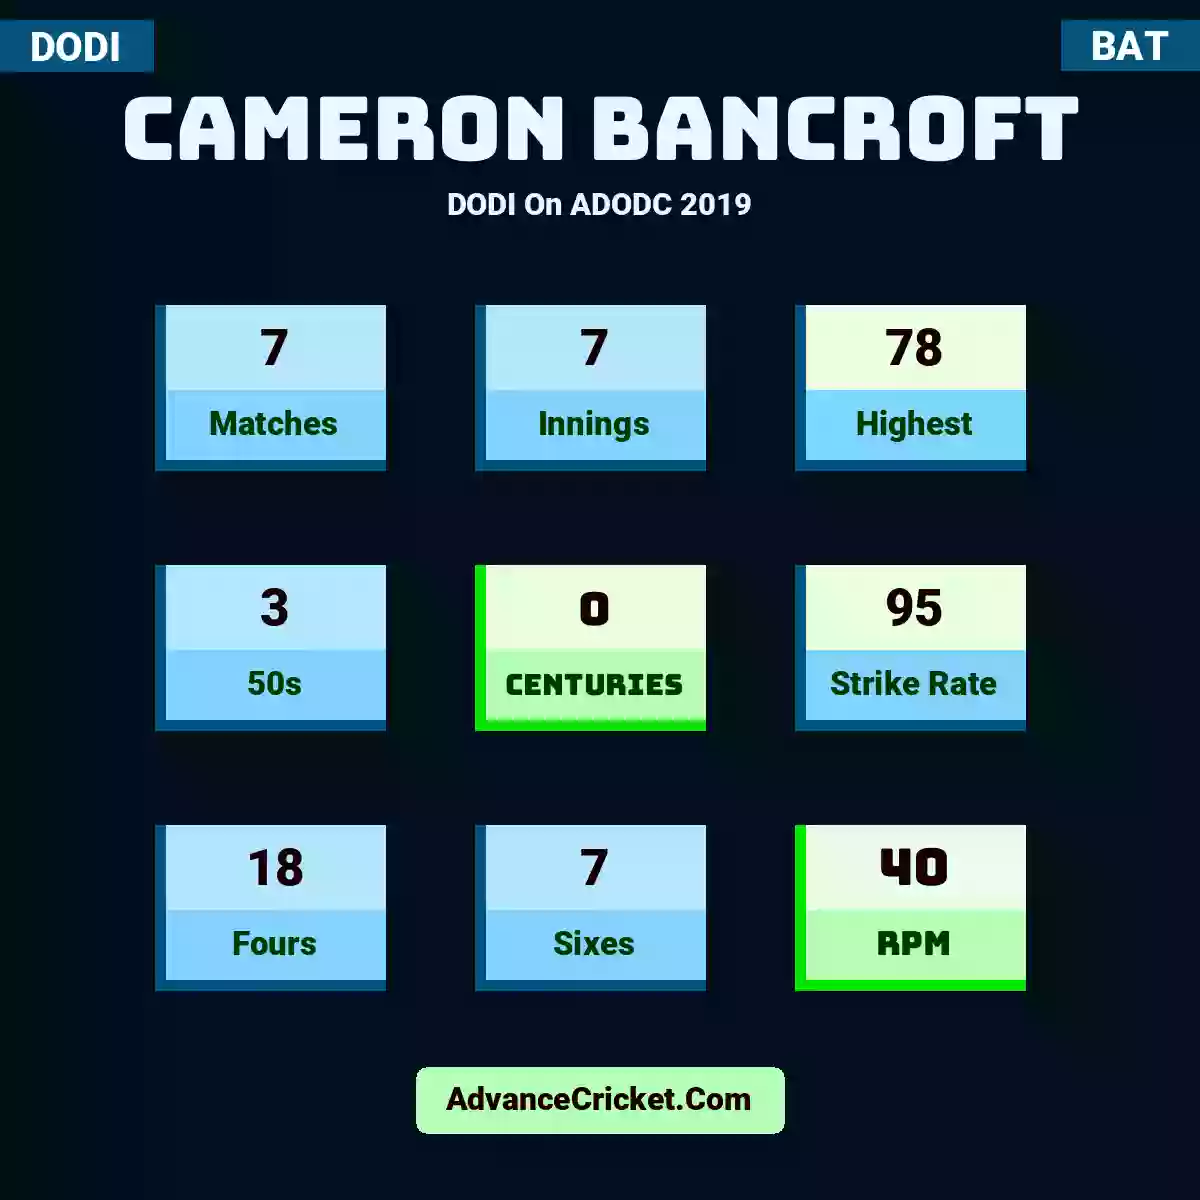 Cameron Bancroft DODI  On ADODC 2019, Cameron Bancroft played 7 matches, scored 78 runs as highest, 3 half-centuries, and 0 centuries, with a strike rate of 95. C.Bancroft hit 18 fours and 7 sixes, with an RPM of 40.